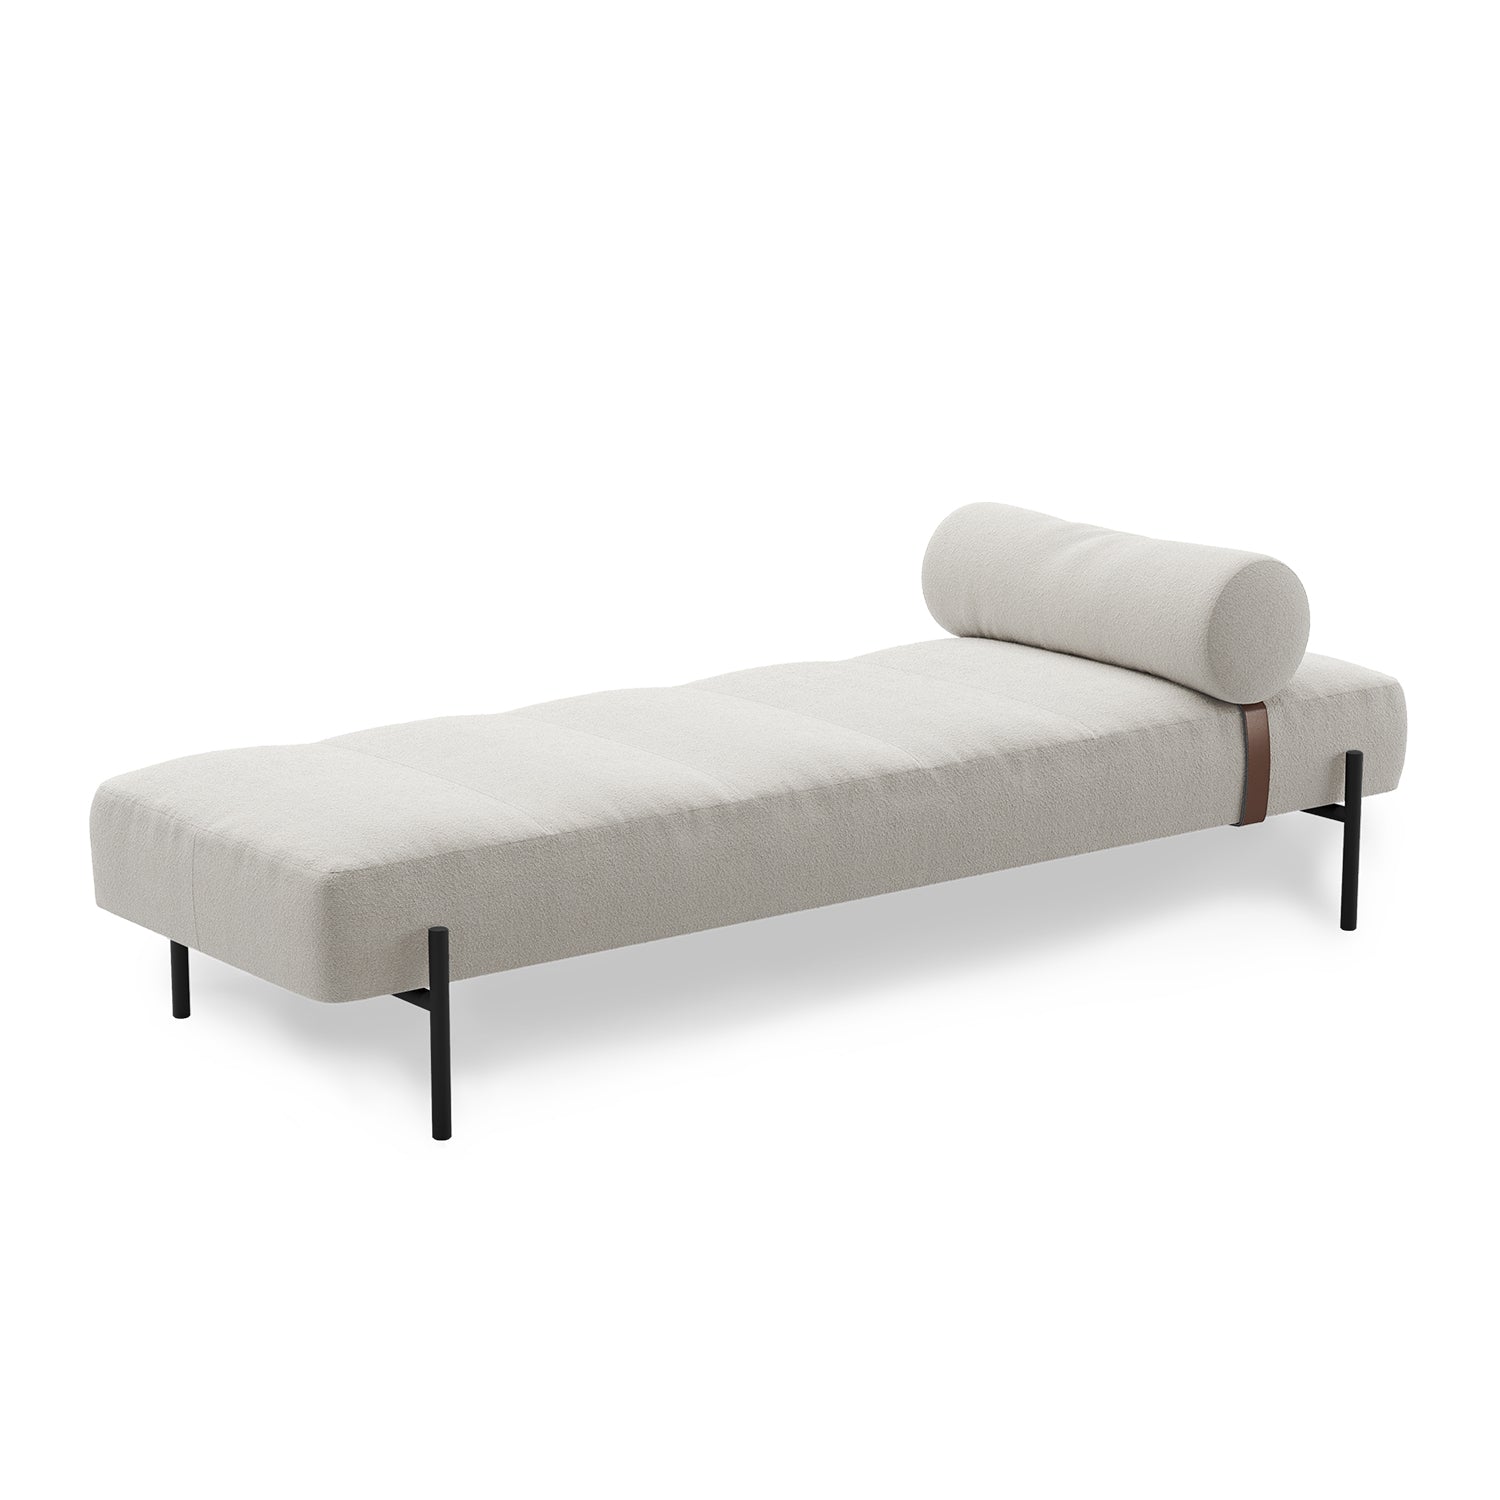 Northern Daybe Daybed in Moss 04 and Black legs